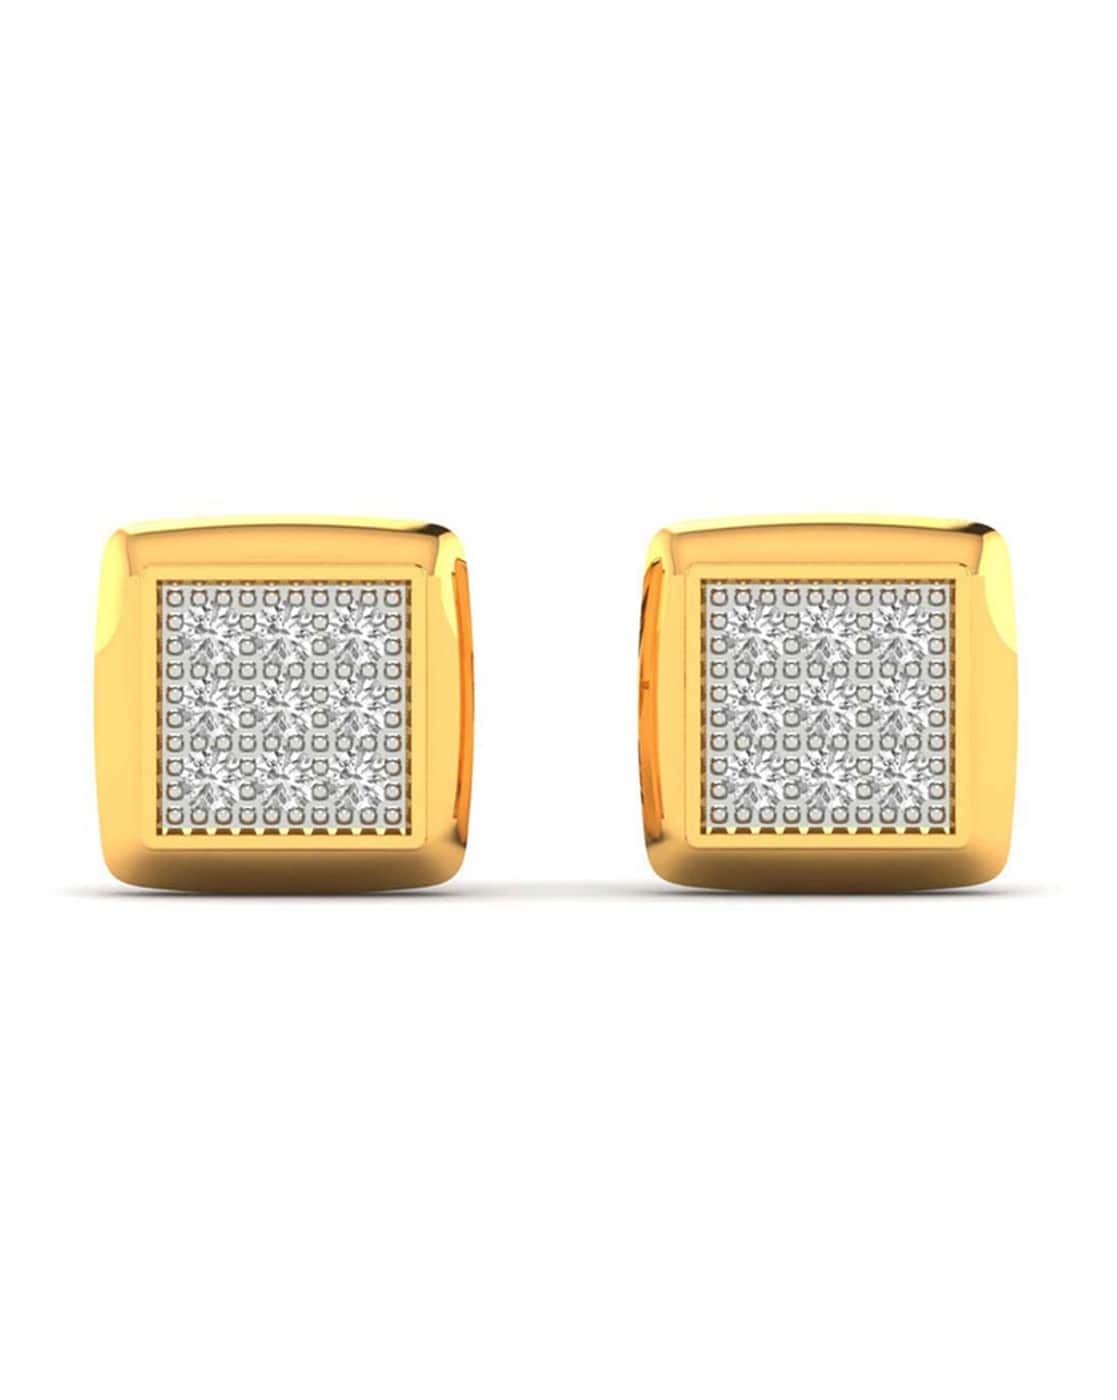 10kt White Gold Mens Round Diamond Square Cluster Stud Earrings 1/5 Ct |  Las Villas Jewelry